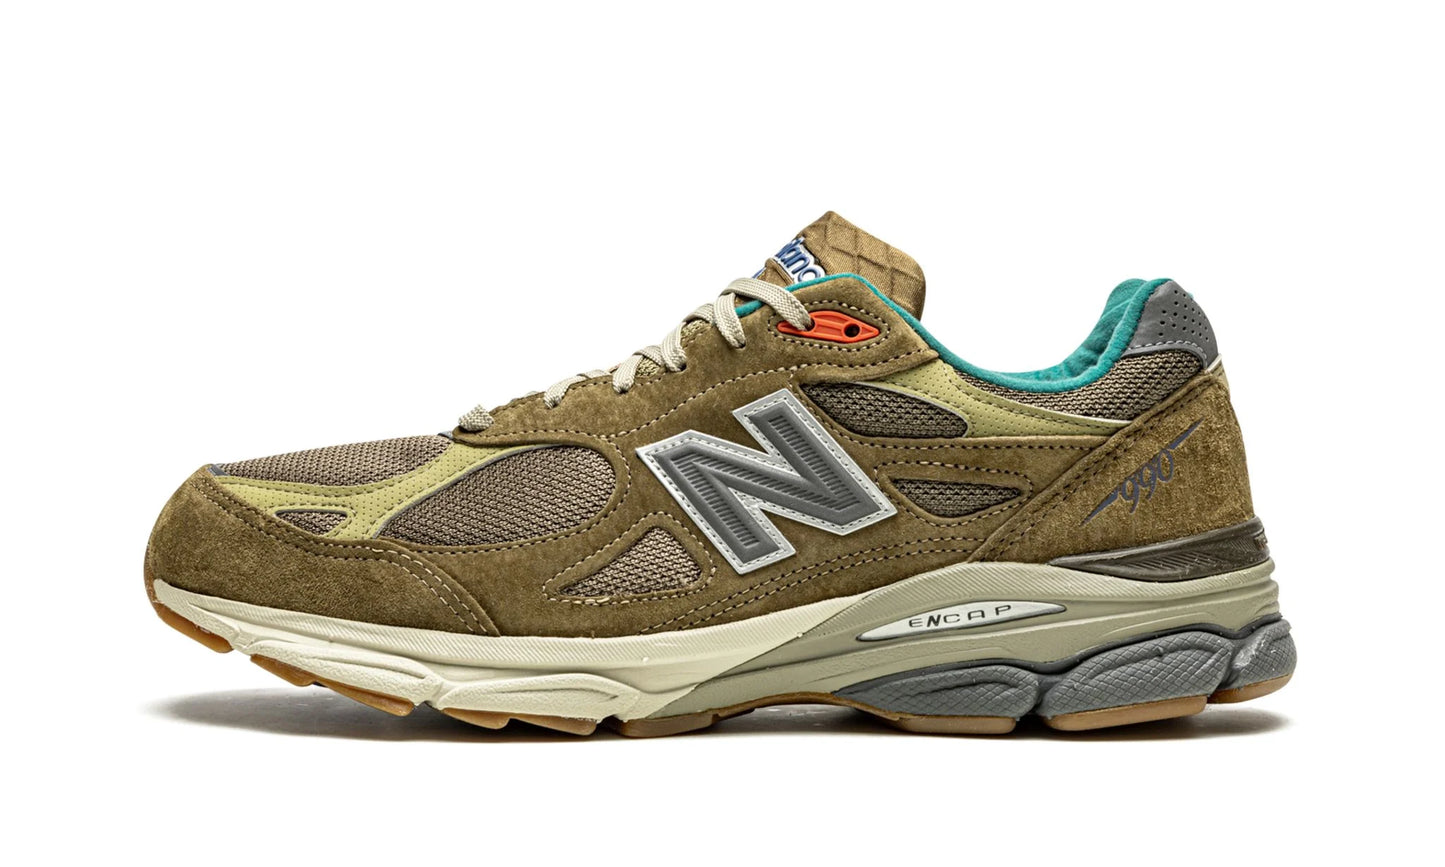 New Balance 990v3 Made In USA Bodega Here To Stay (PRE-OWNED)